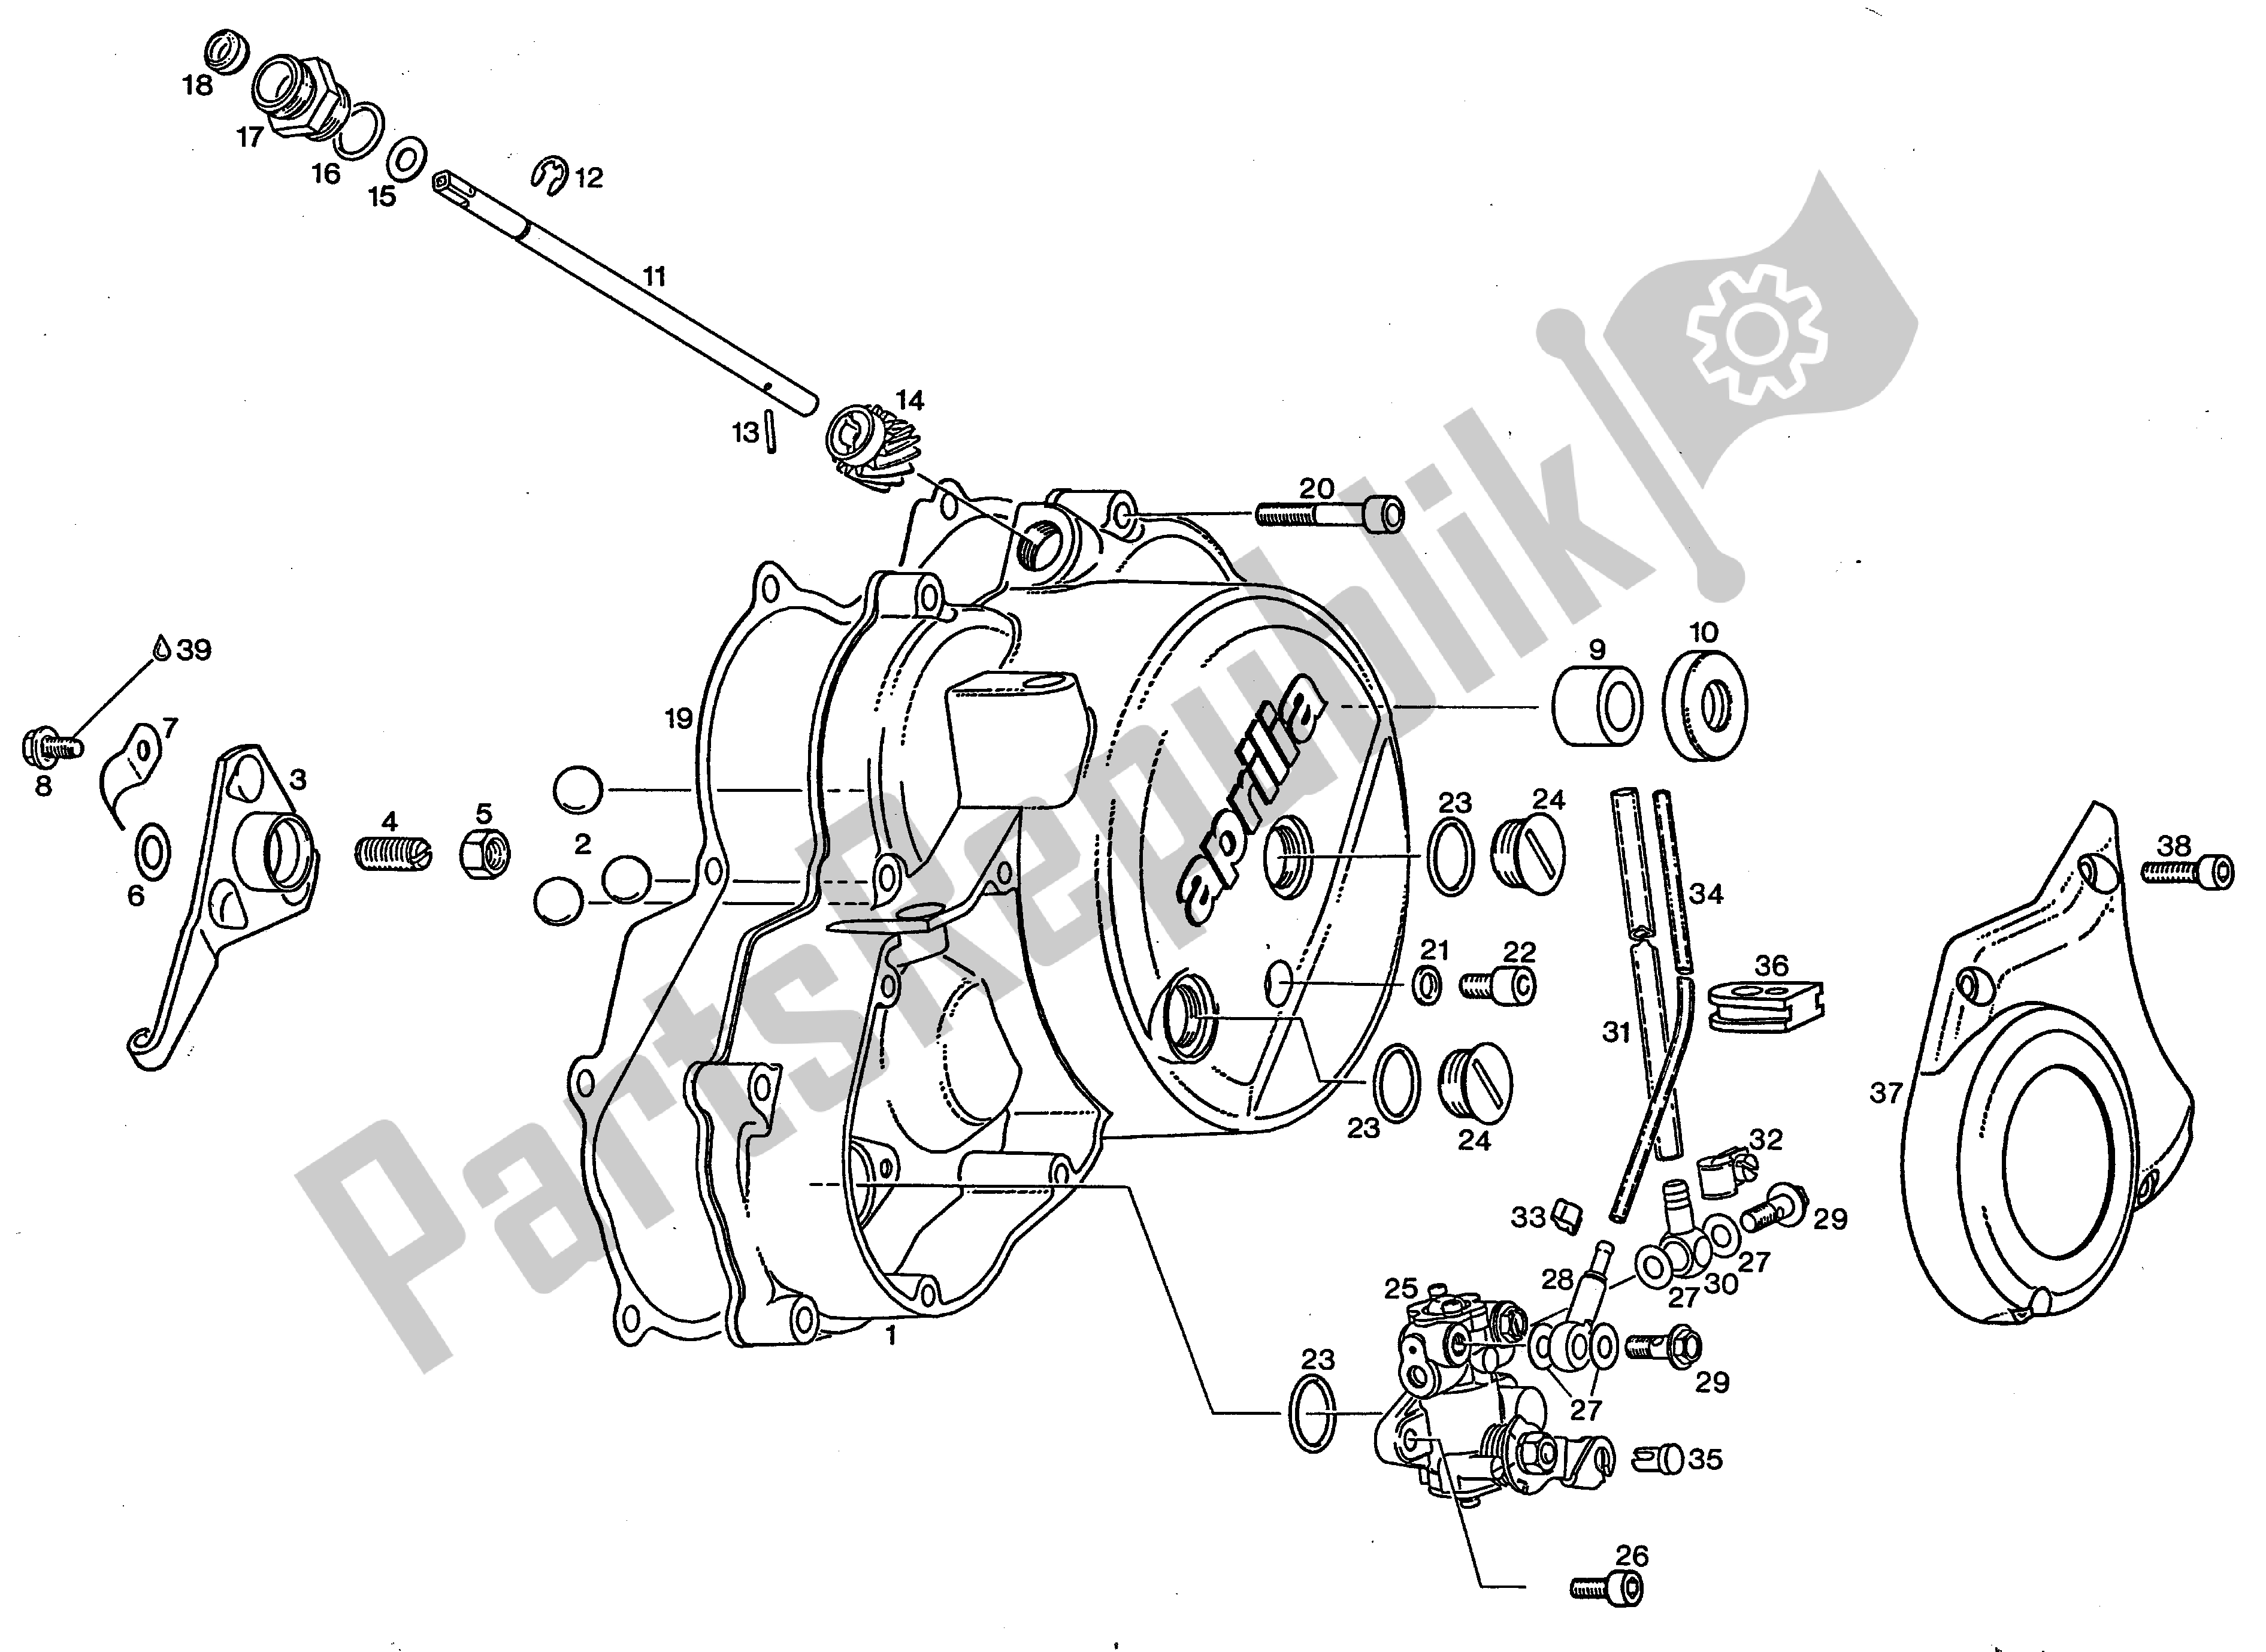 All parts for the Kupplungsdeckel, Mech. Drehzaehler, Oelpumpe Clutch Cover, Mech. Revolution Counter, Oil Pump of the Aprilia Rotax 123 125 1990 - 2000